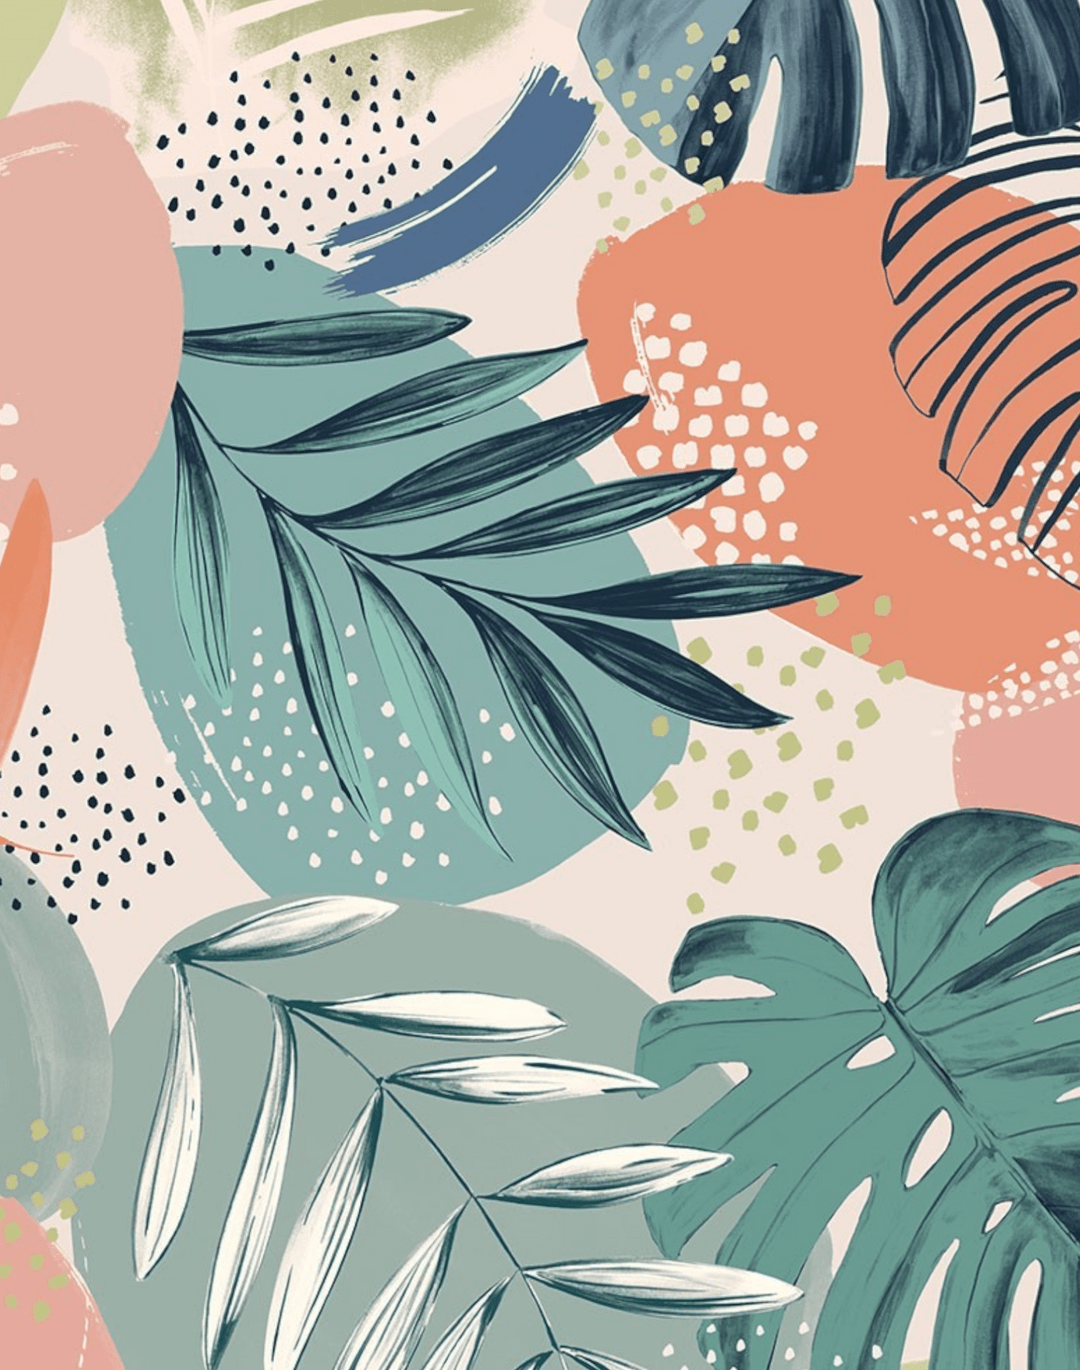 A pattern of painted leaves in green, orange and pink on a white background - Jungle, illustration